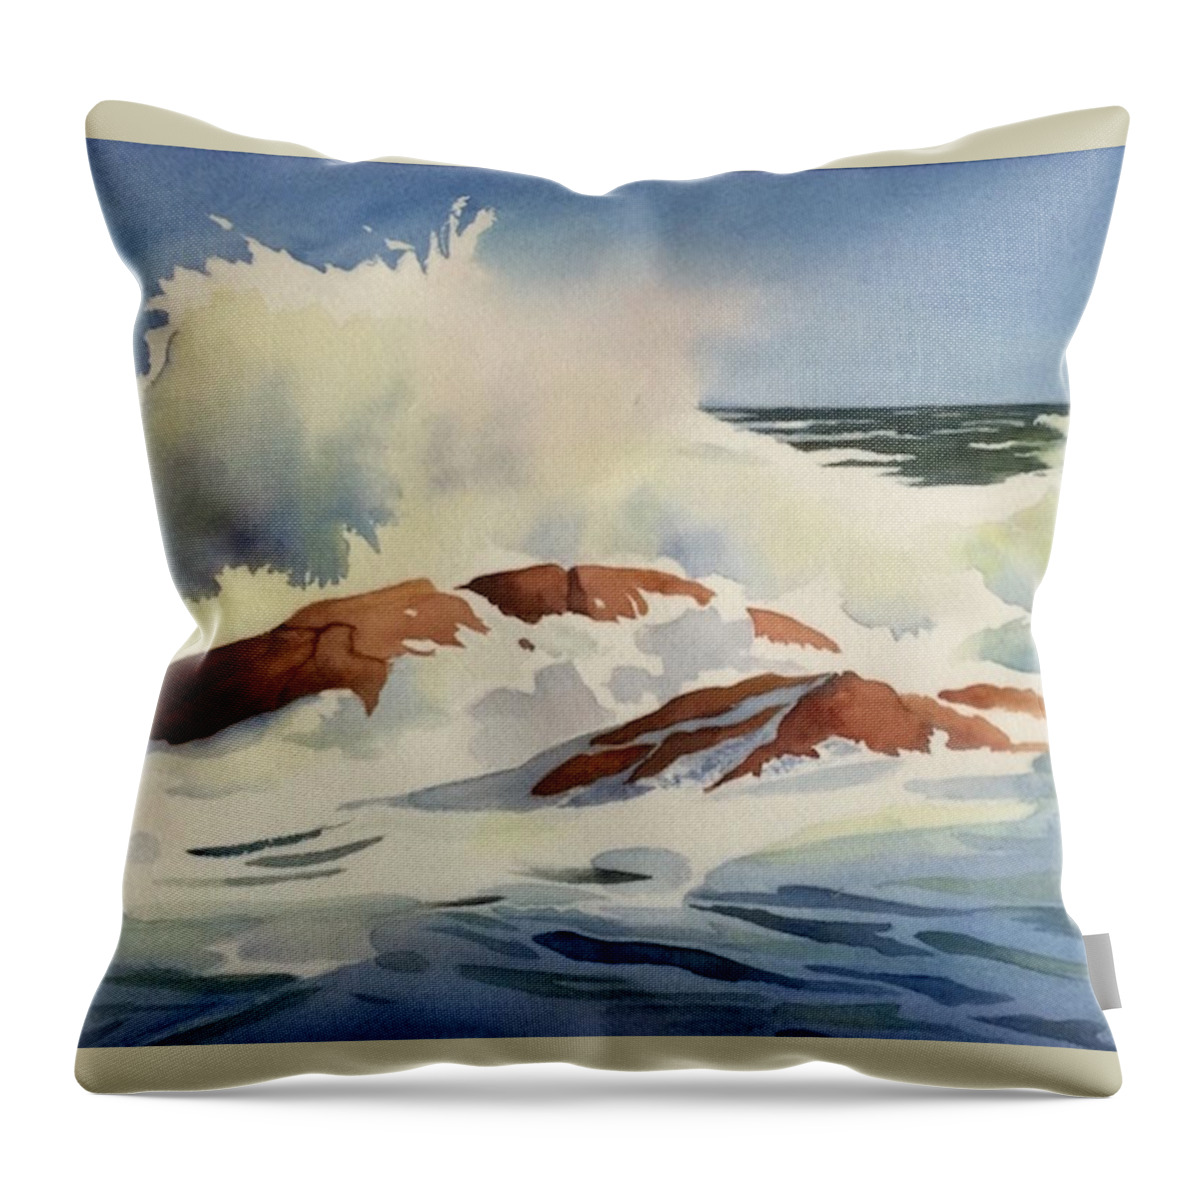 Aquarelle Throw Pillow featuring the painting La Vague by Francoise Chauray